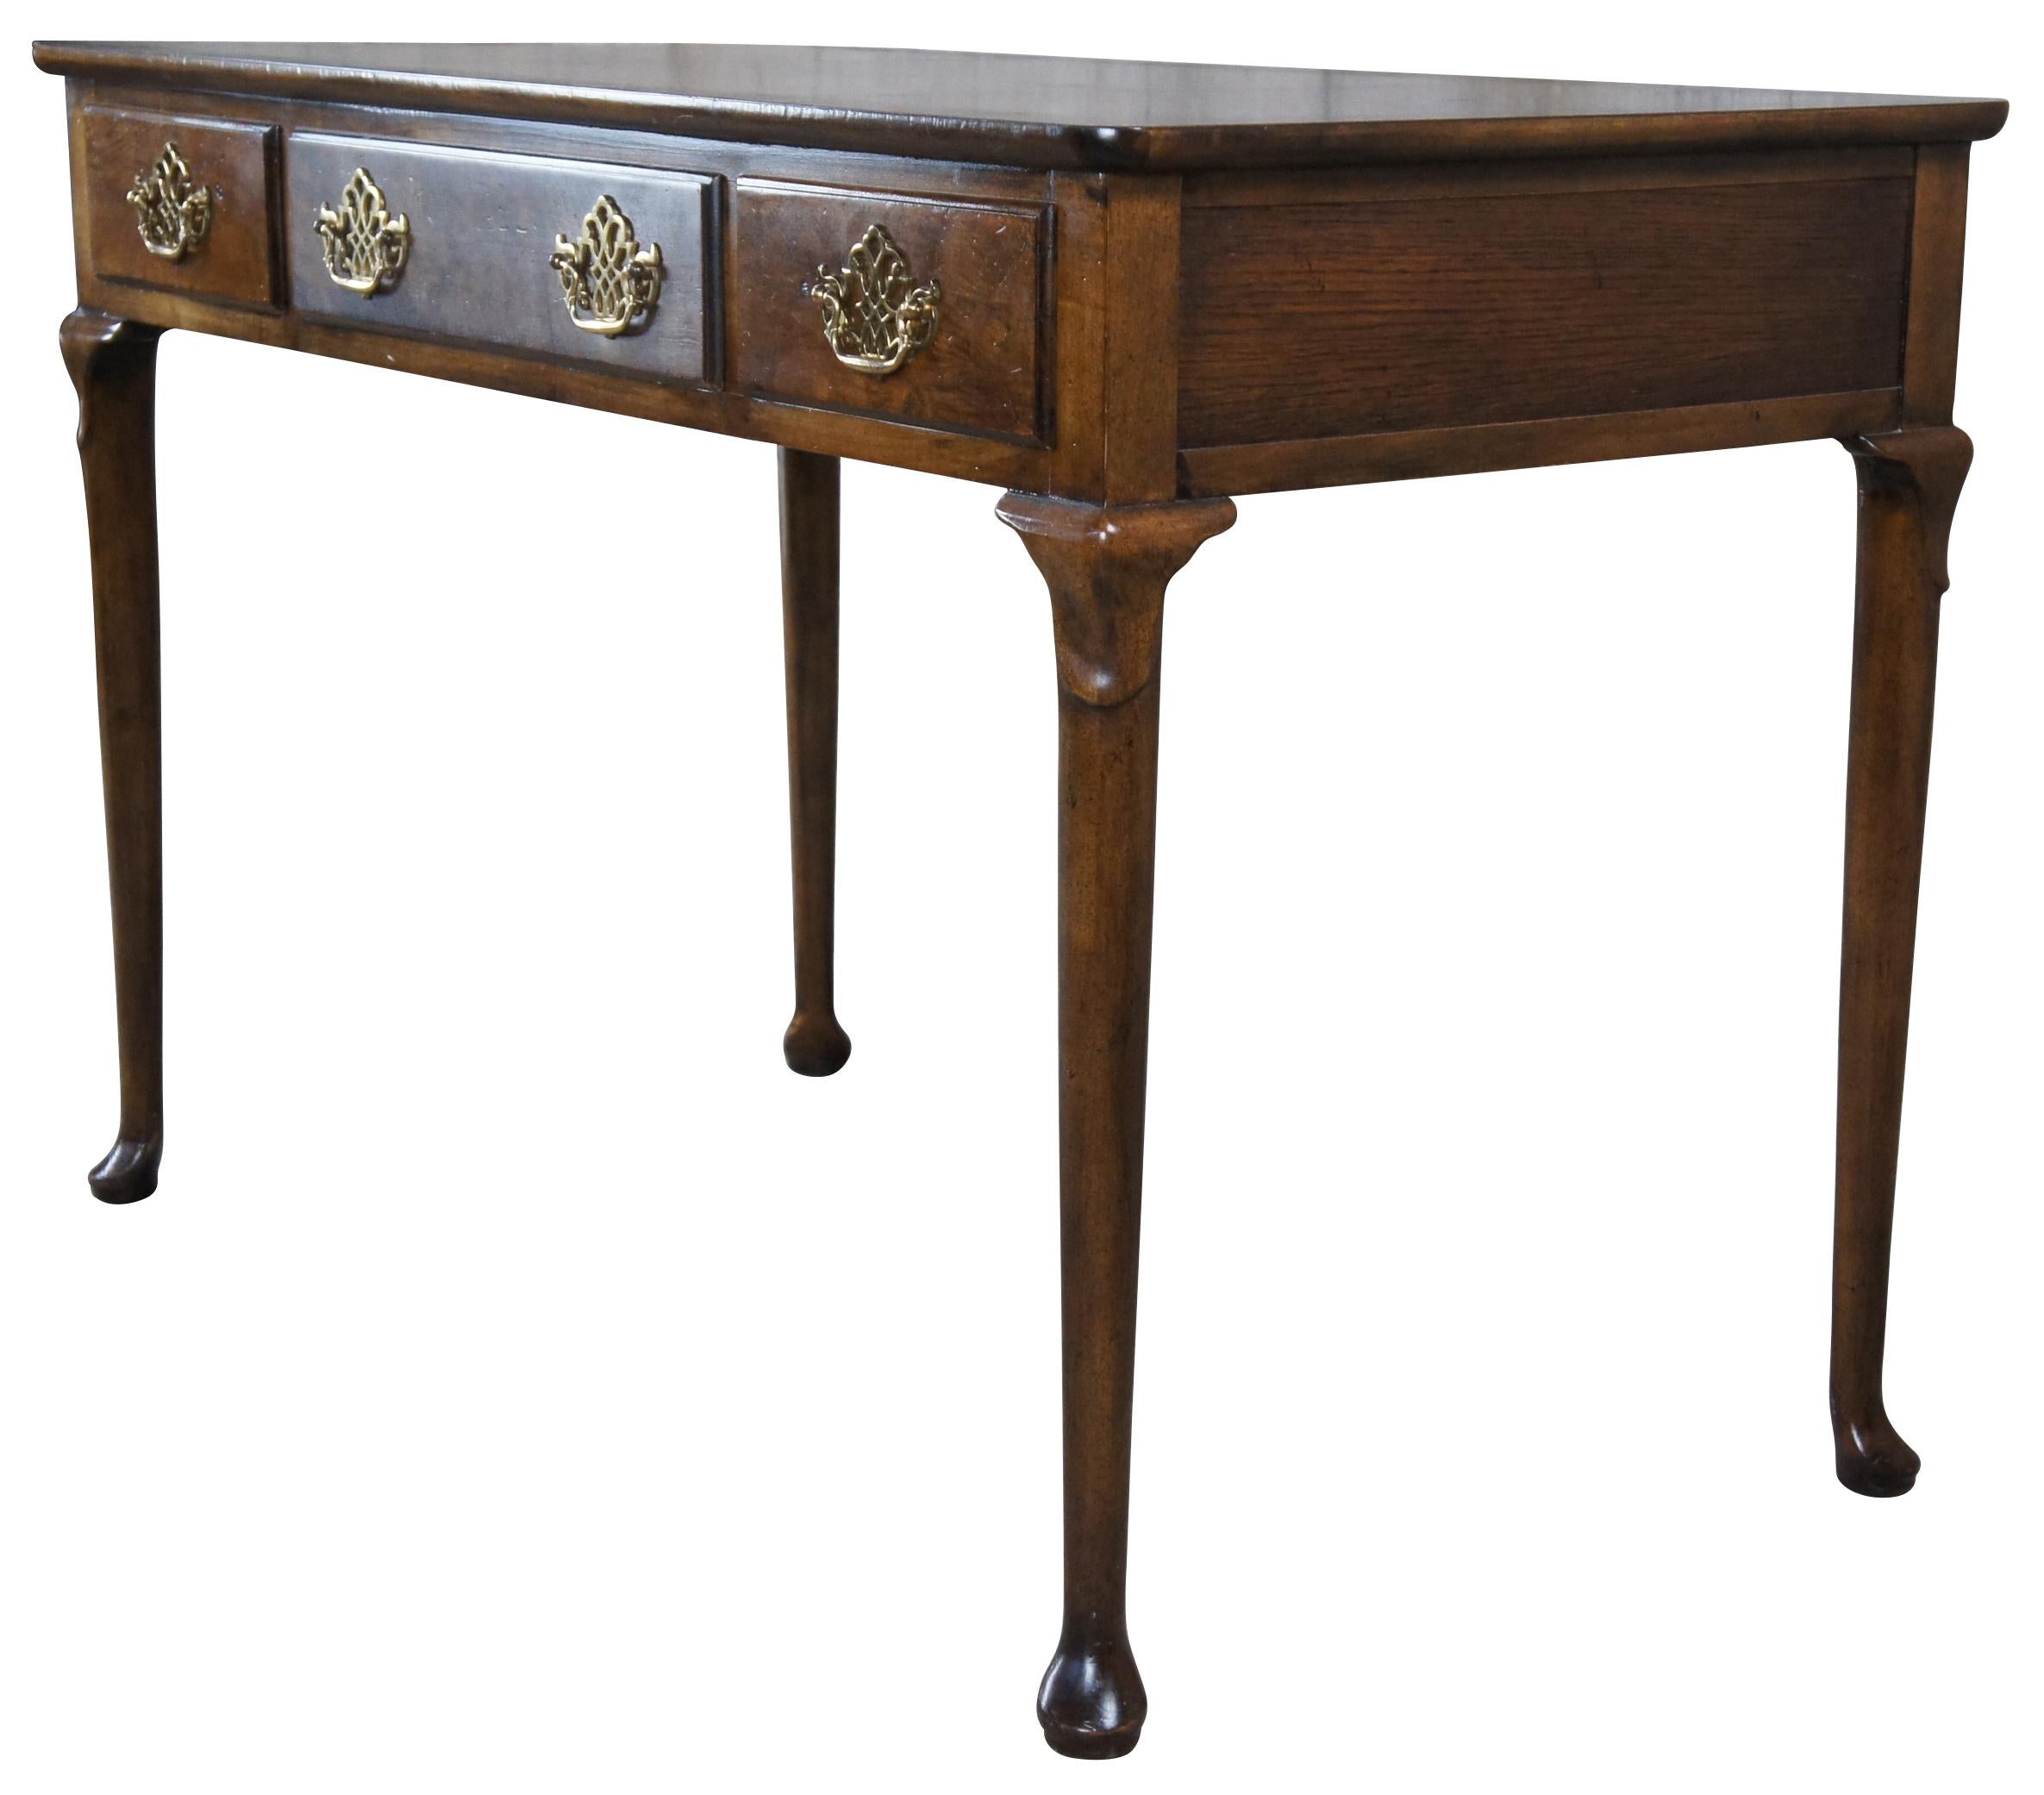 A quaint writing desk by Baker Furniture, circa 1960s. Made from walnut with a beautiful matchbook burled and banded top. Features three dovetailed drawers within the frieze. Each having classic Chippendale pierced brass batwing drawer pulls. The